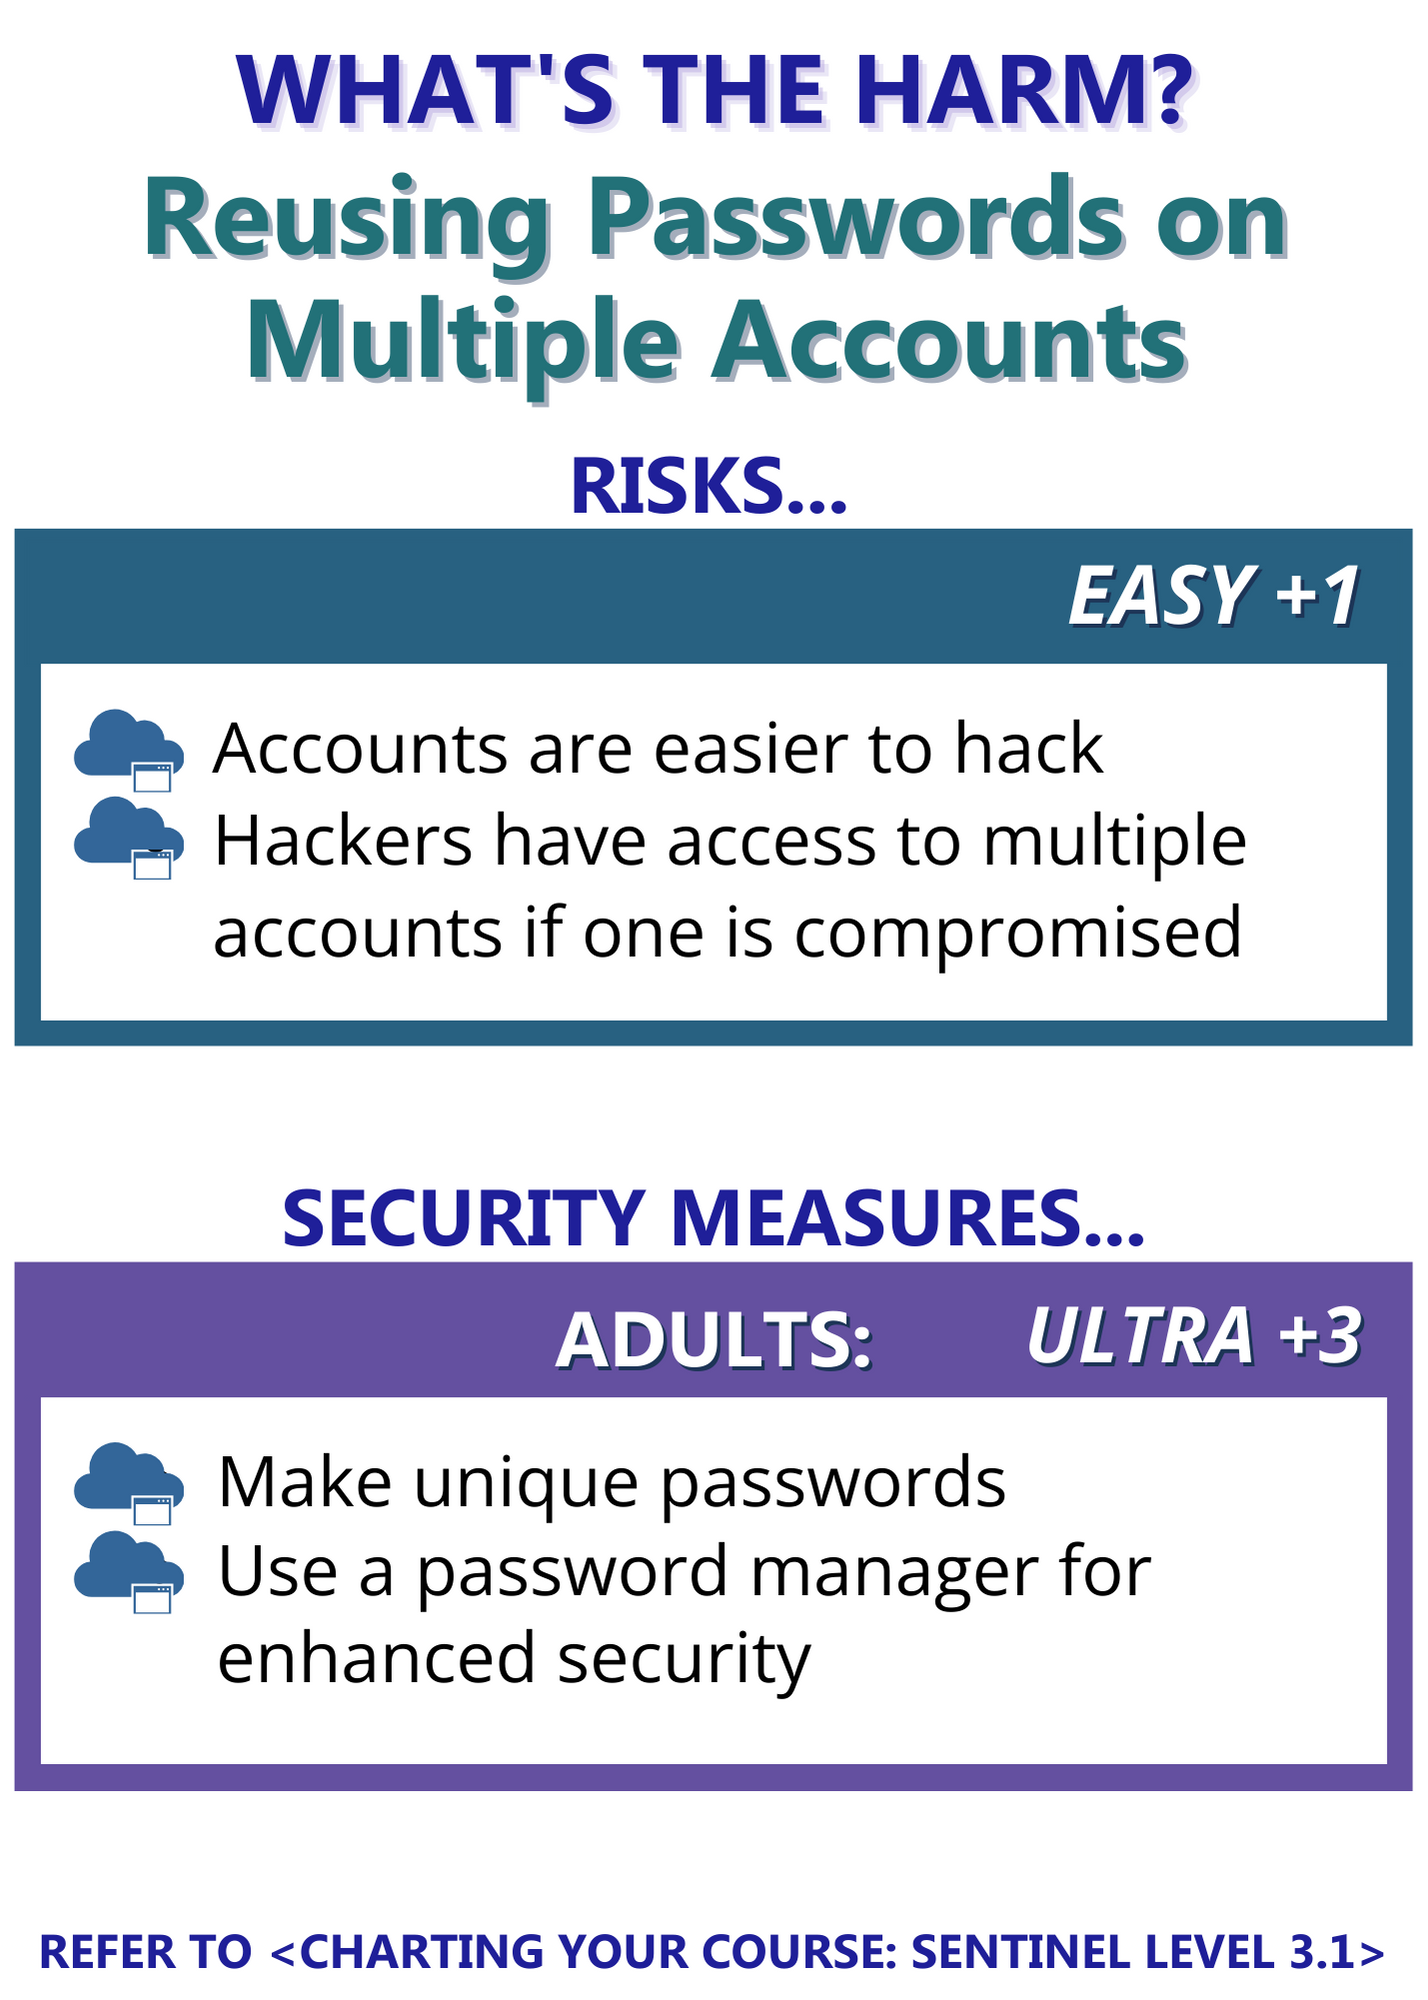 Reusing Passwords on Multiple Accounts BACK